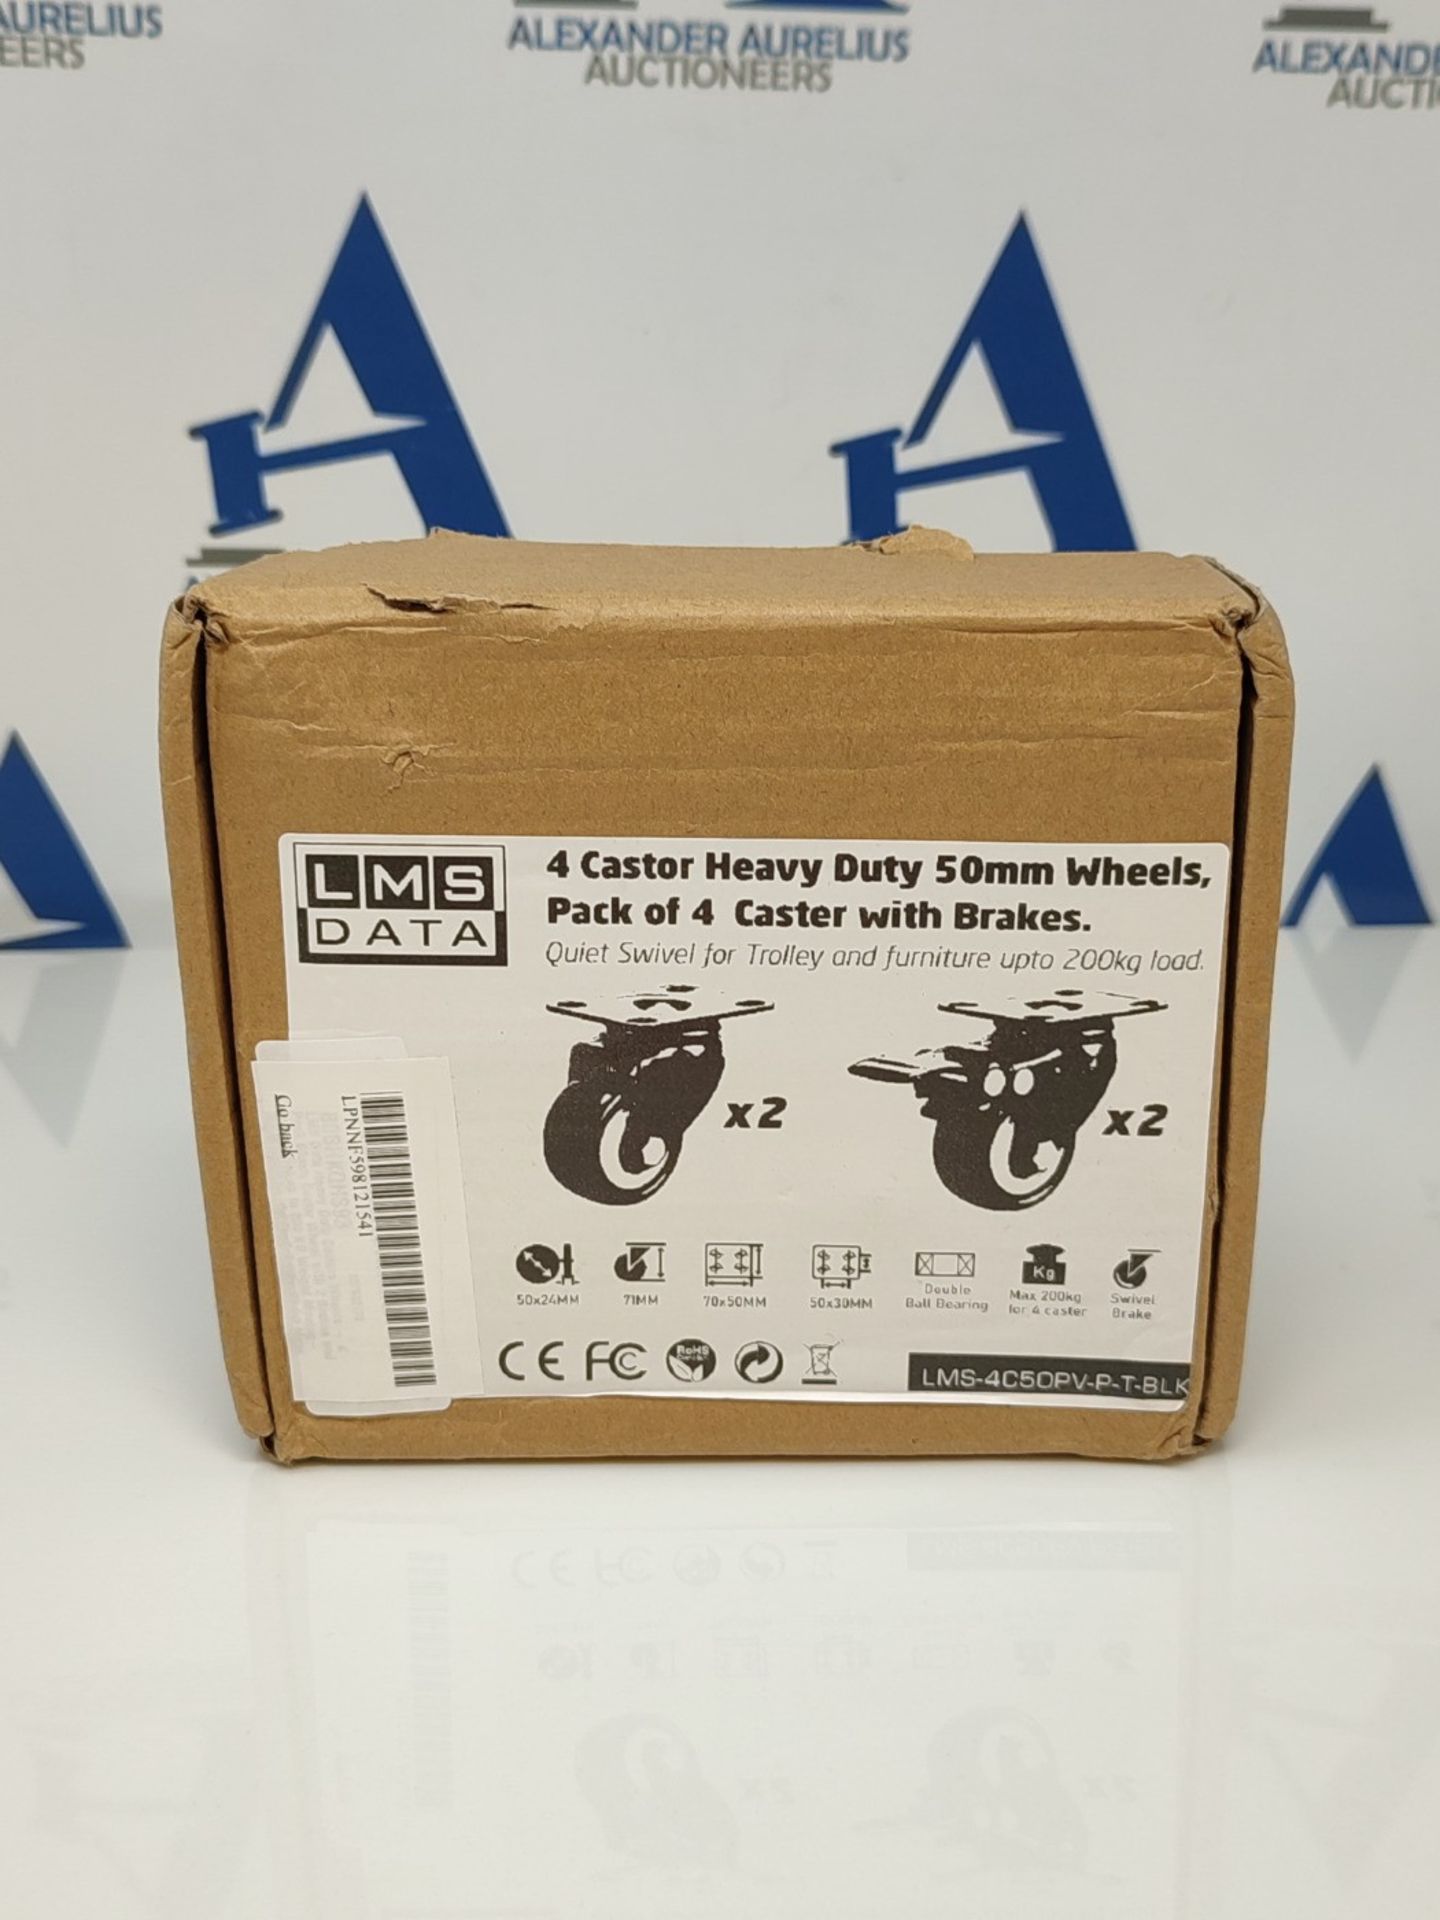 LMS Data Heavy Duty Castors Wheels - 4 Pack 50mm Castor Wheel with 2 Brakes and Screws - Image 2 of 3